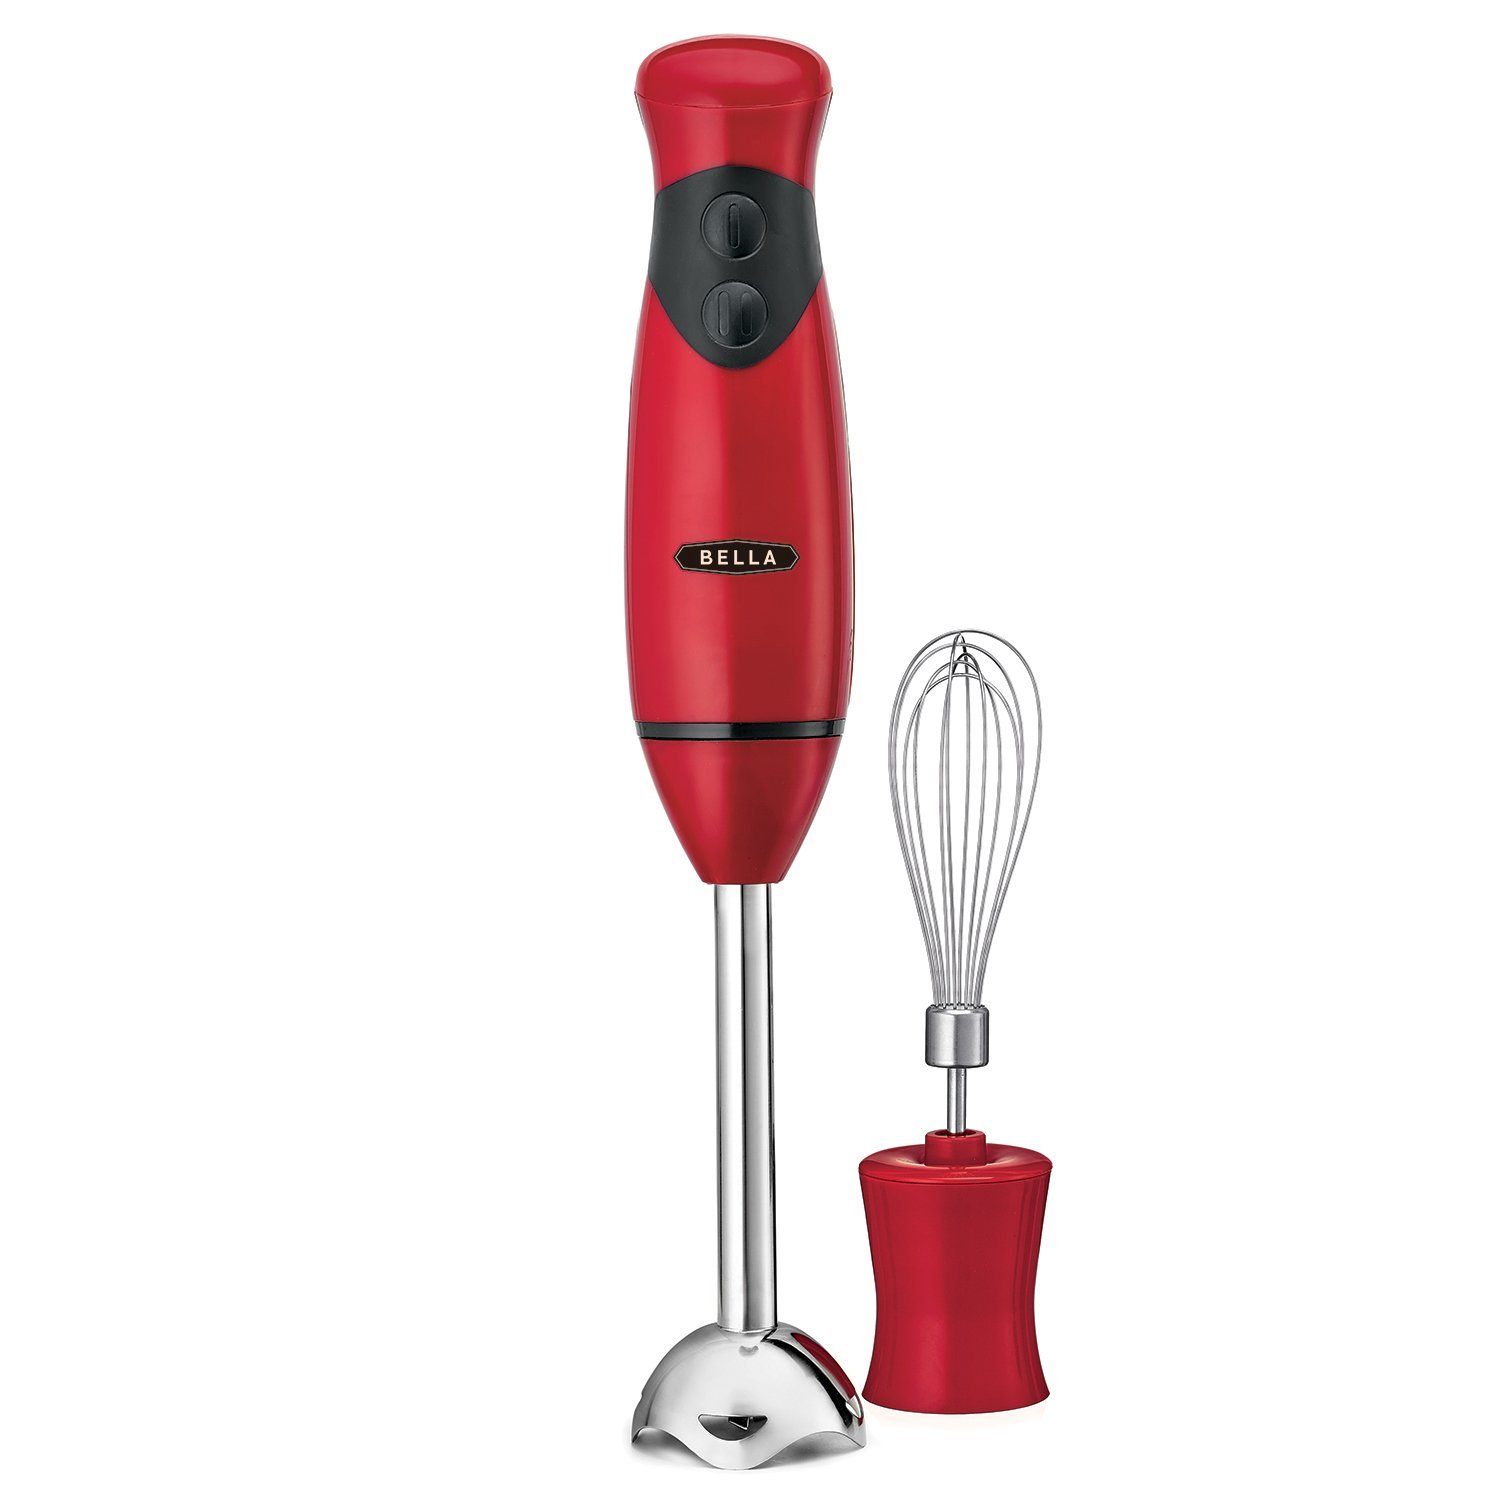 Amazon.com: BELLA Hand Immersion Blender with Whisk Attachment, 250 ...